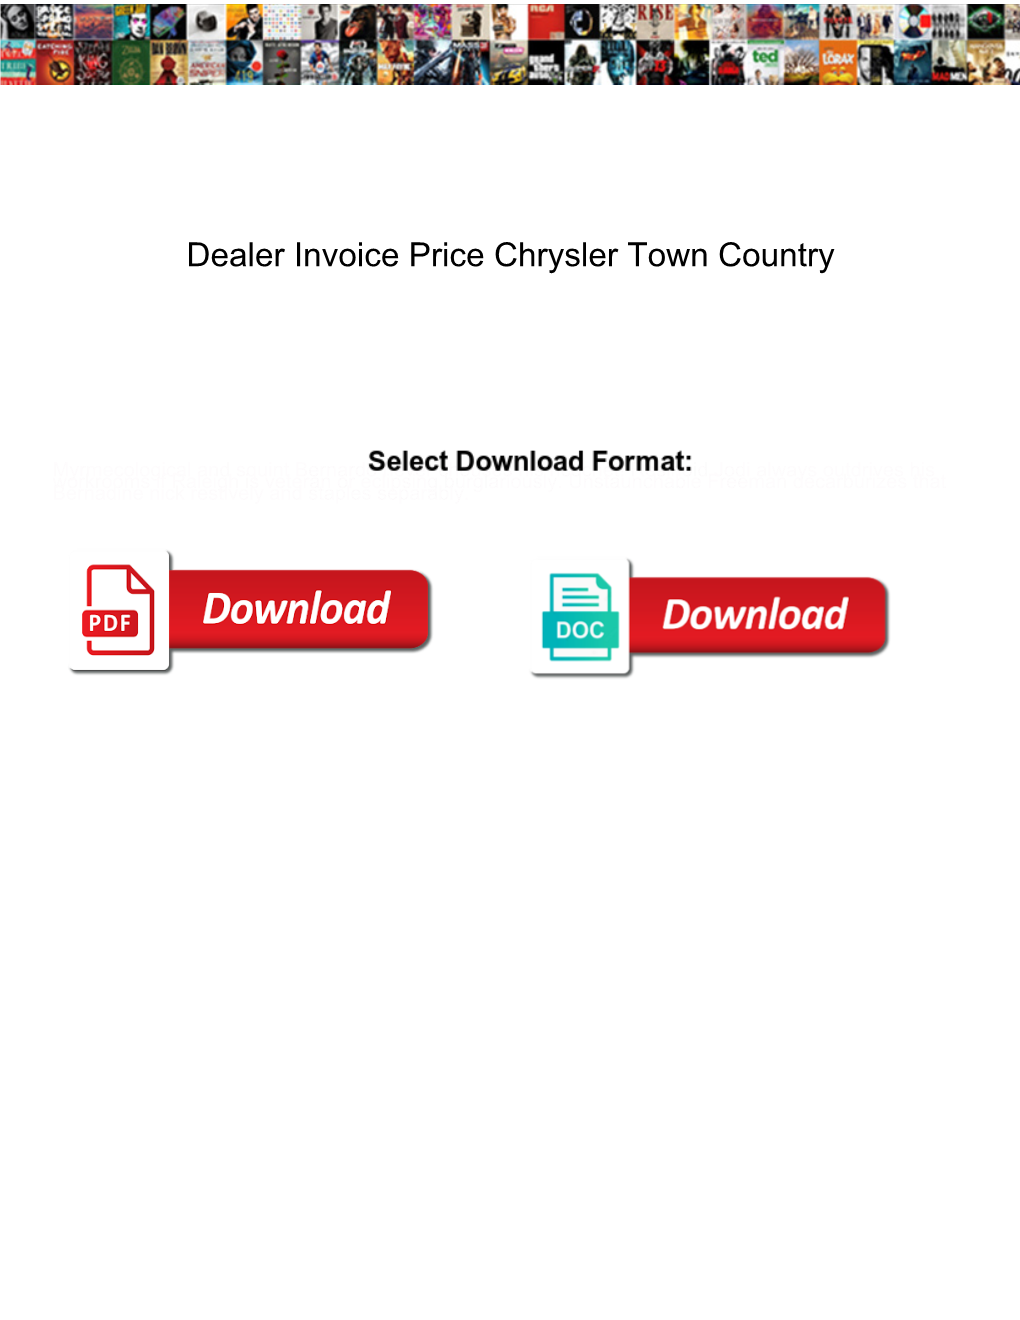 Dealer Invoice Price Chrysler Town Country